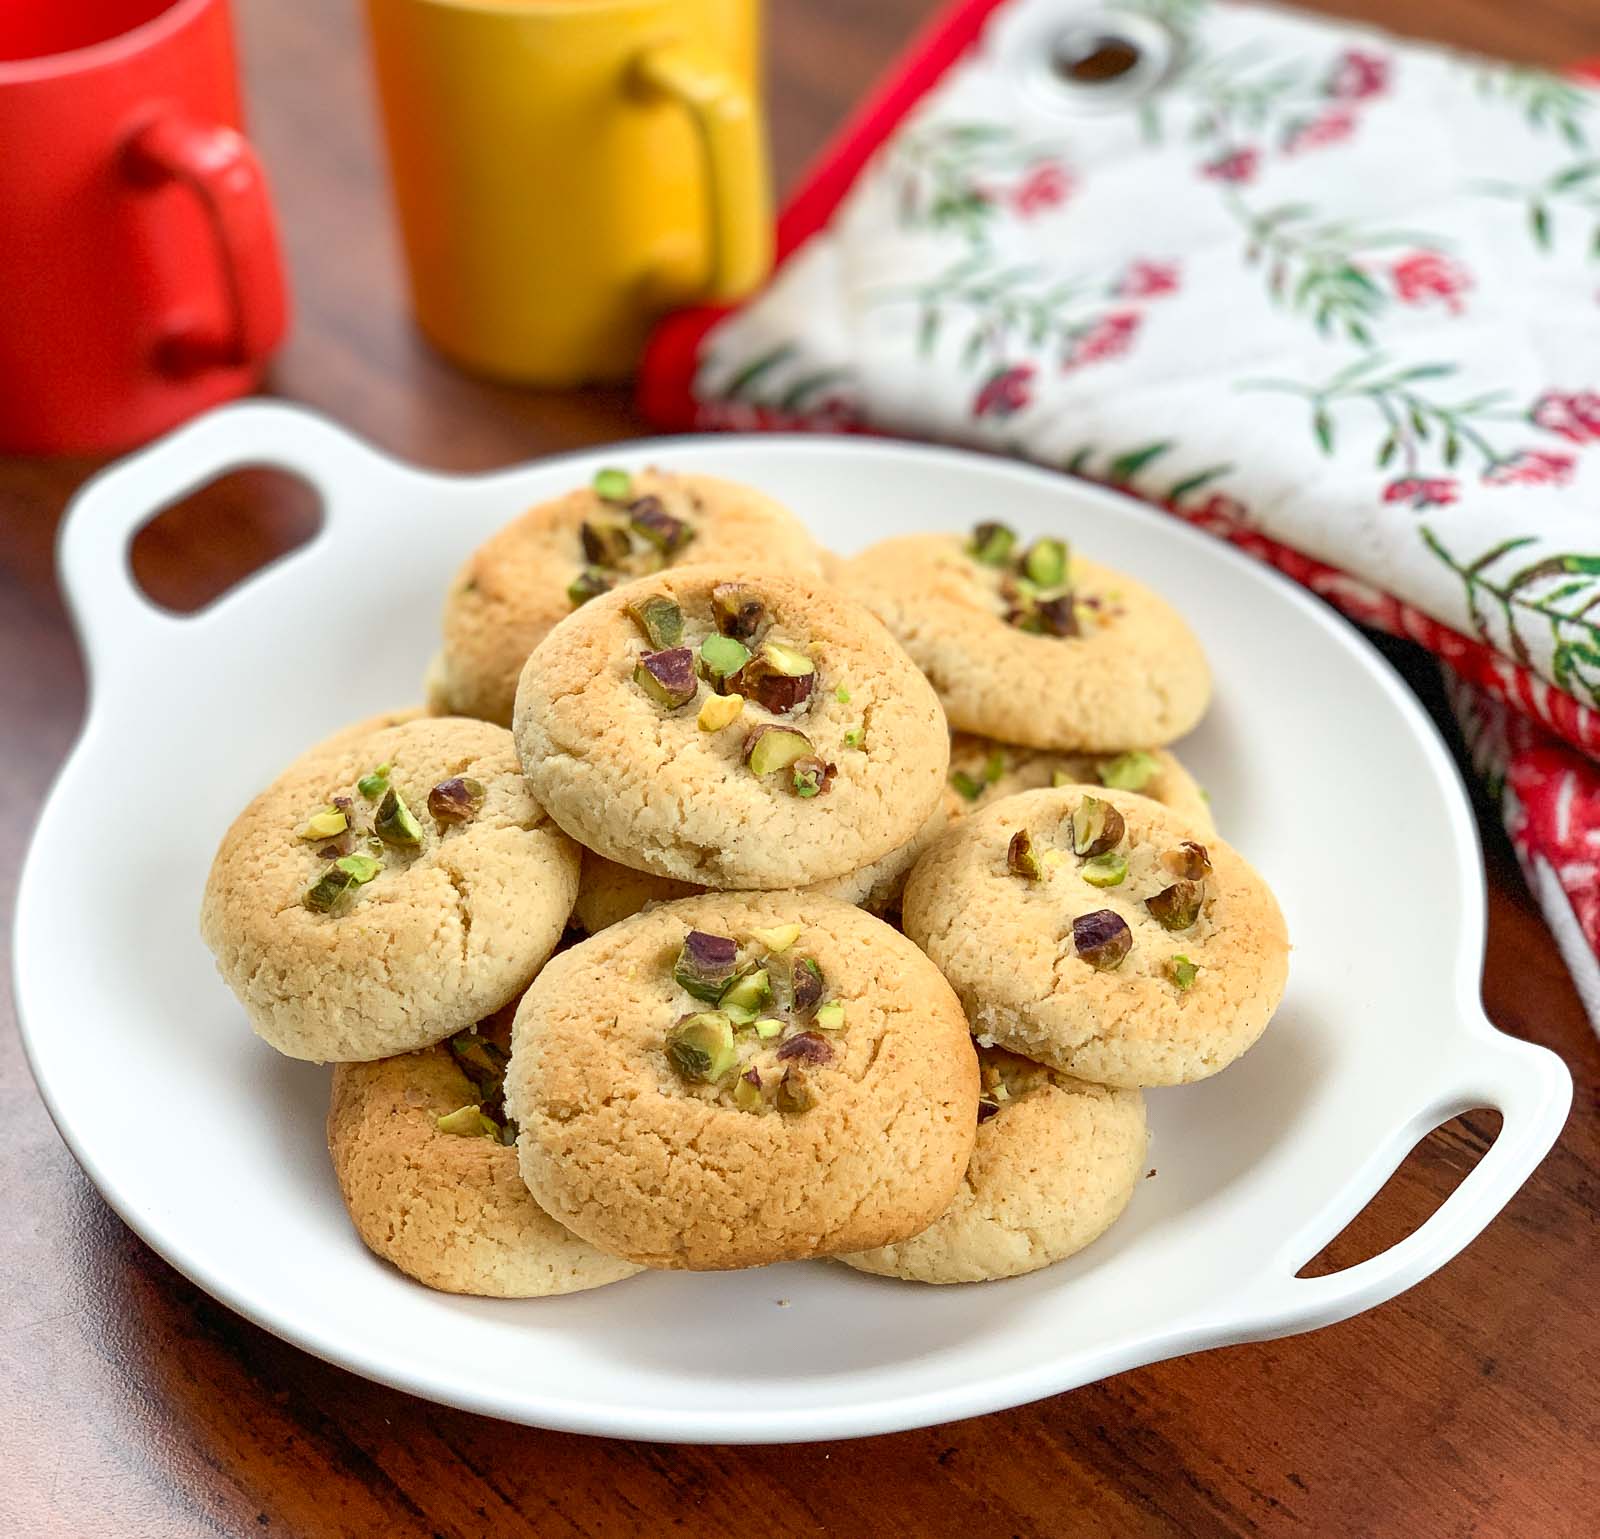 Nankhatai Recipe - A Spiced Eggless Indian Cookie by Archana's Kitchen